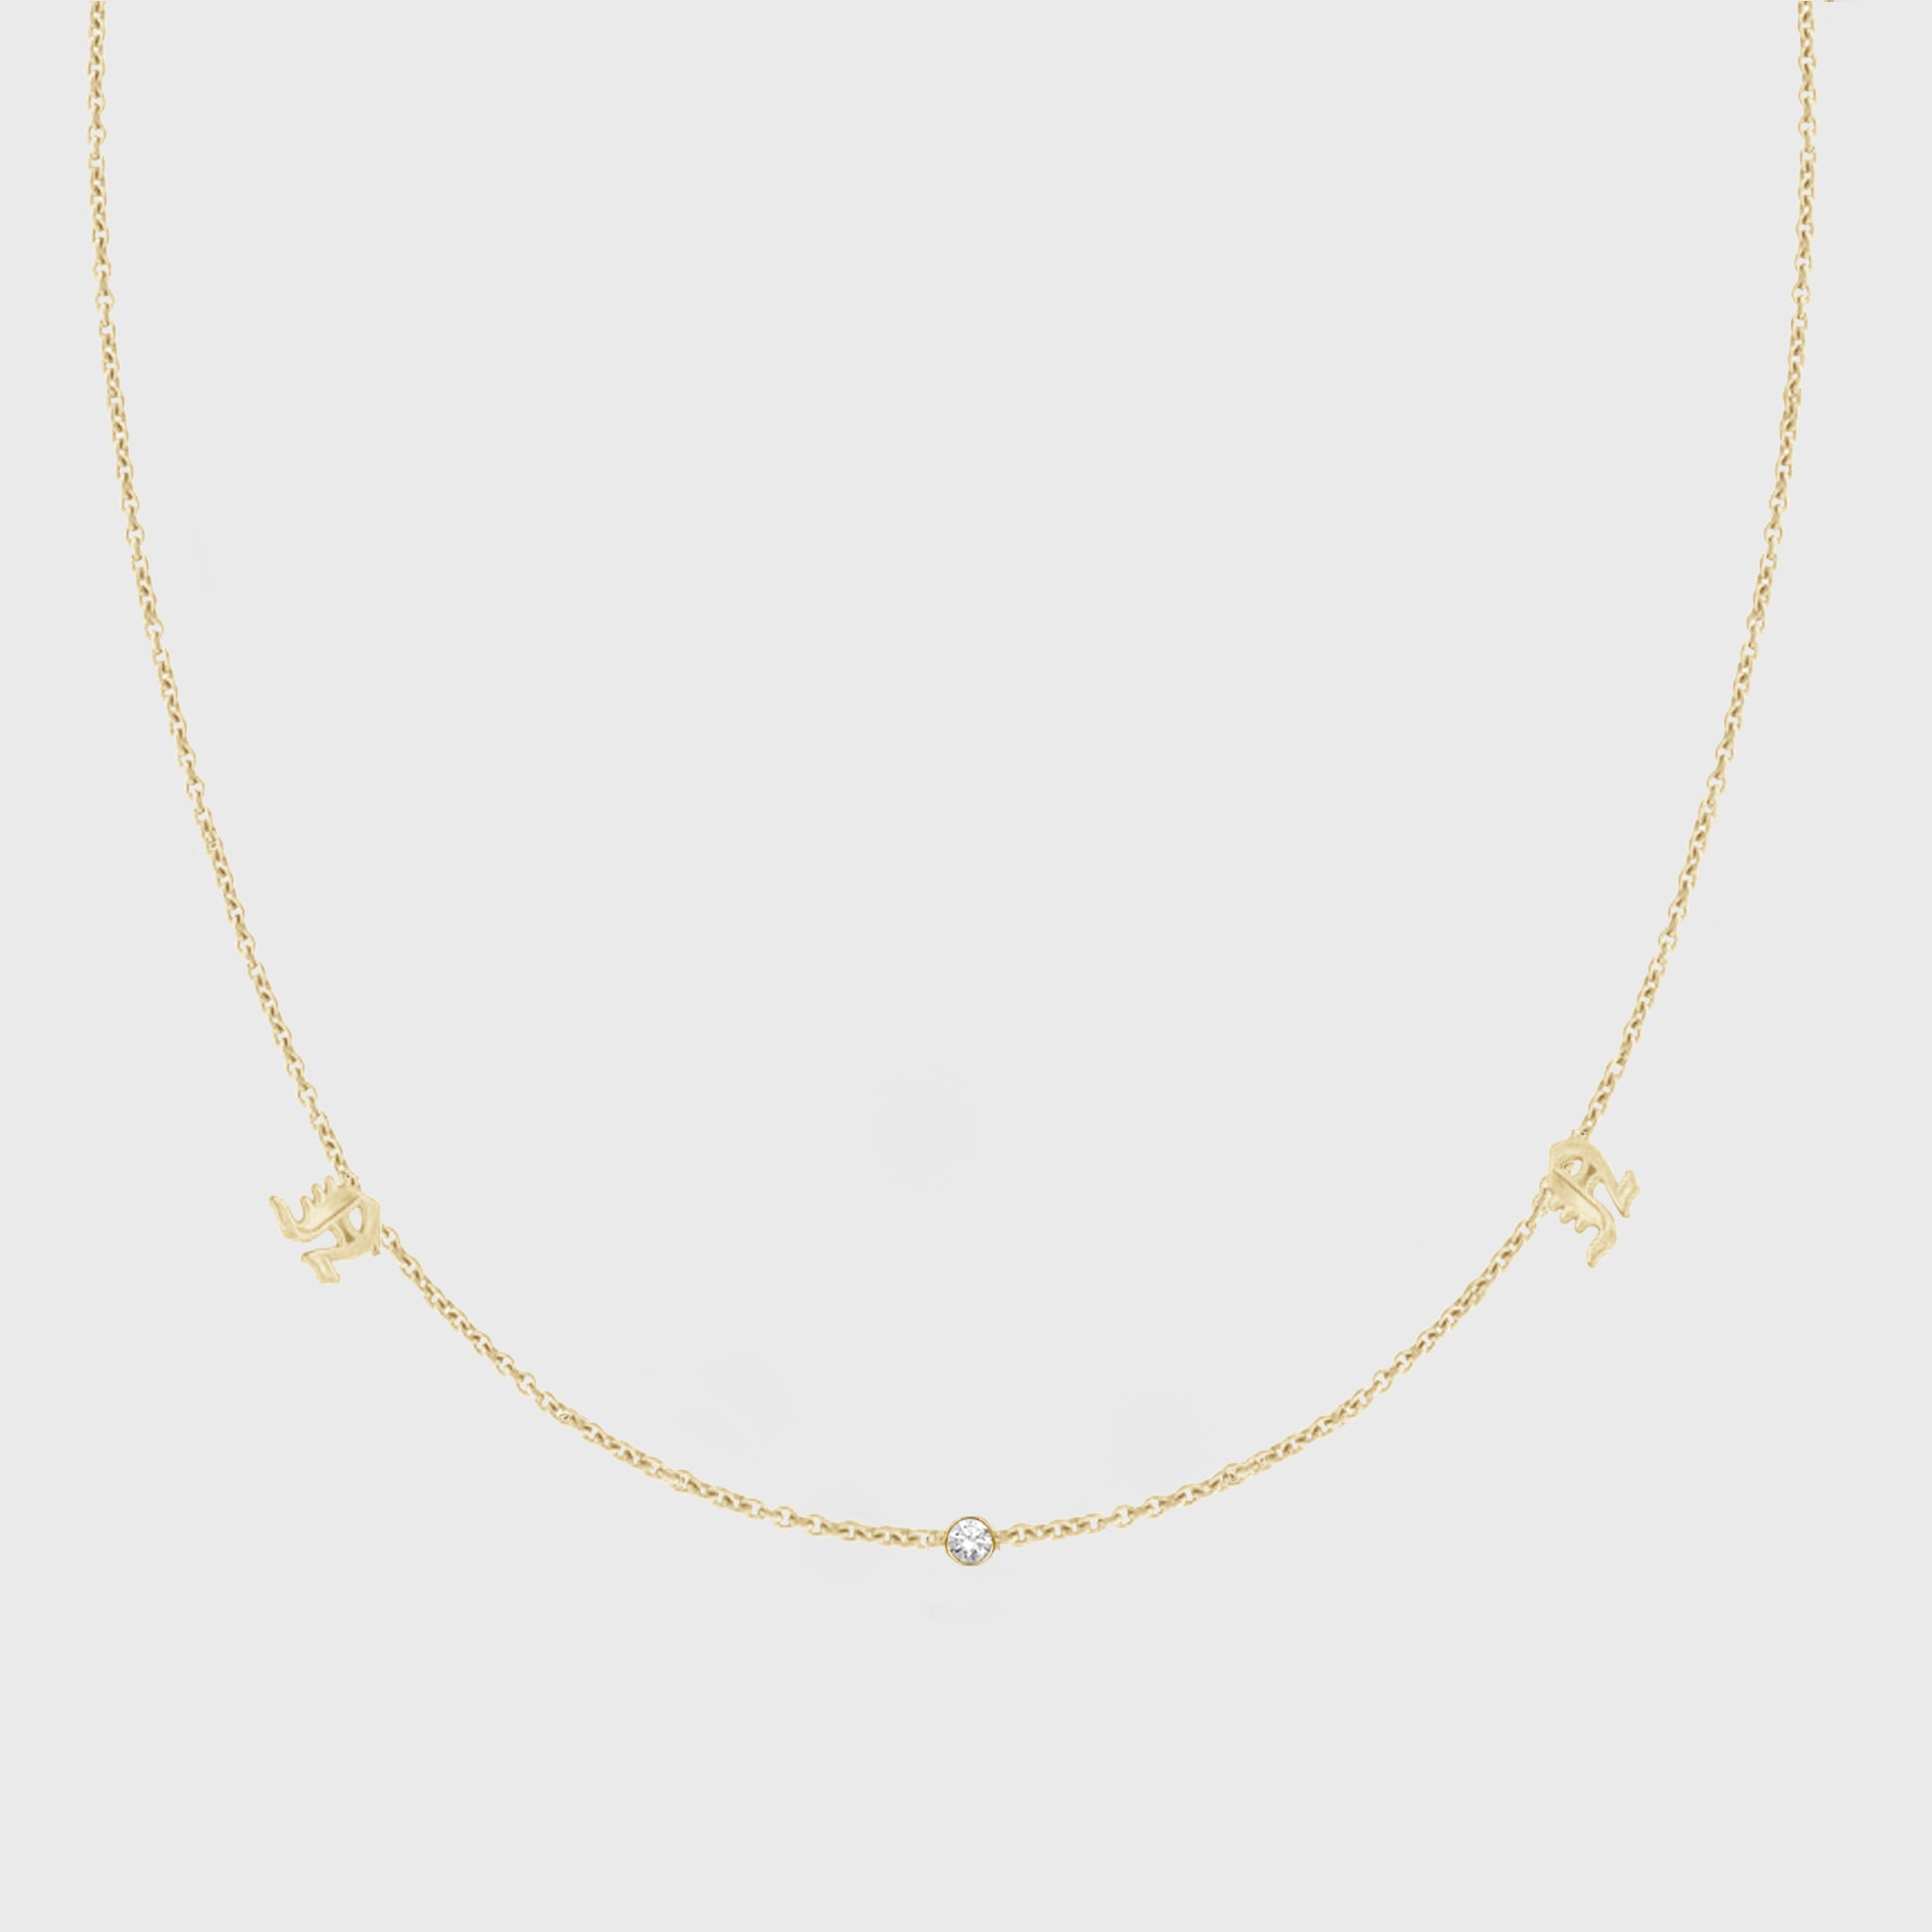 14k dainty old english initial necklace - 3 letters / diamonds